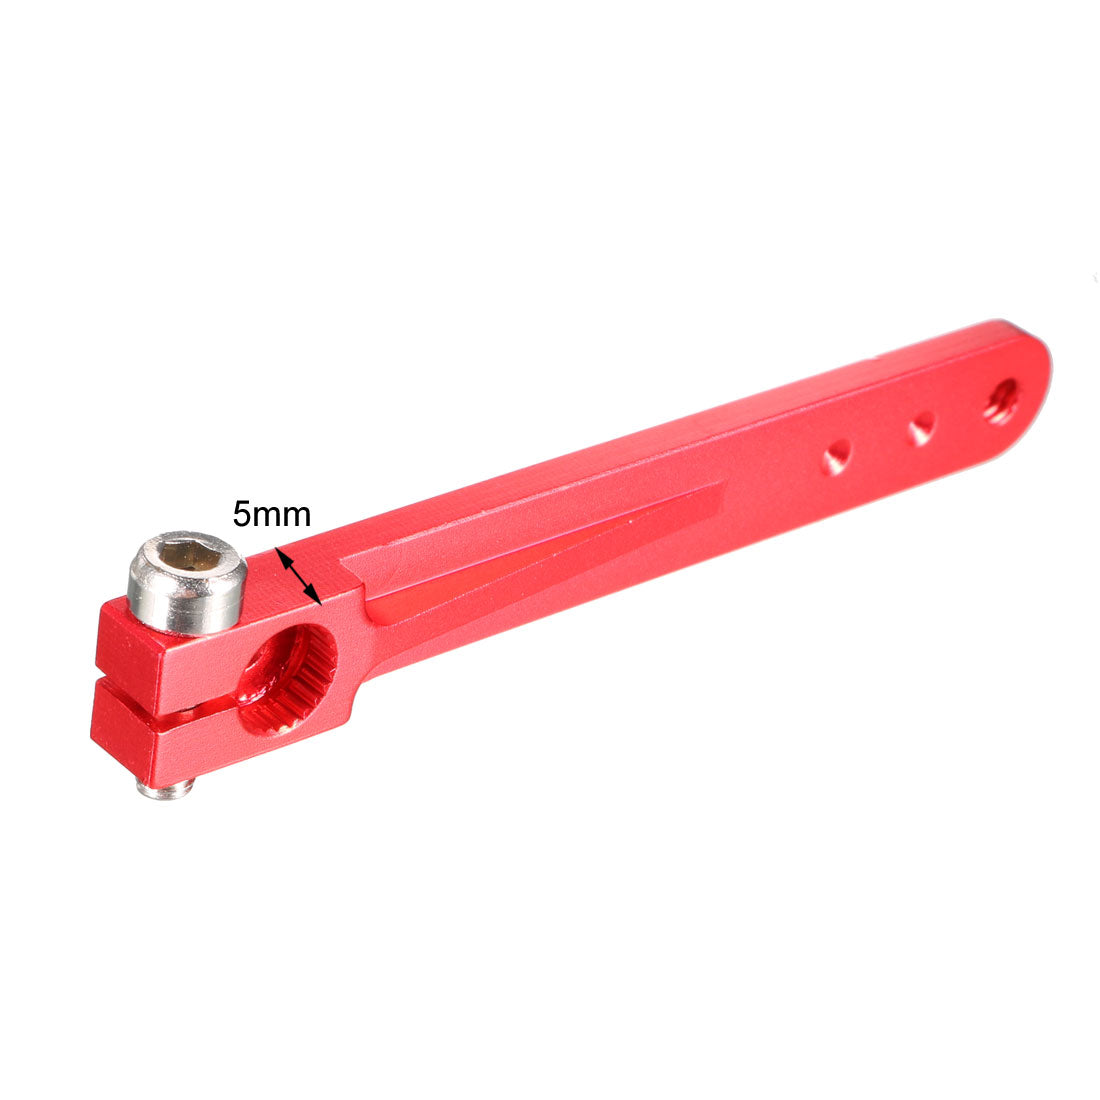 uxcell Uxcell Aluminum Servo Arms Single Arm 24T 4-40# Thread Red, for 2 Inch